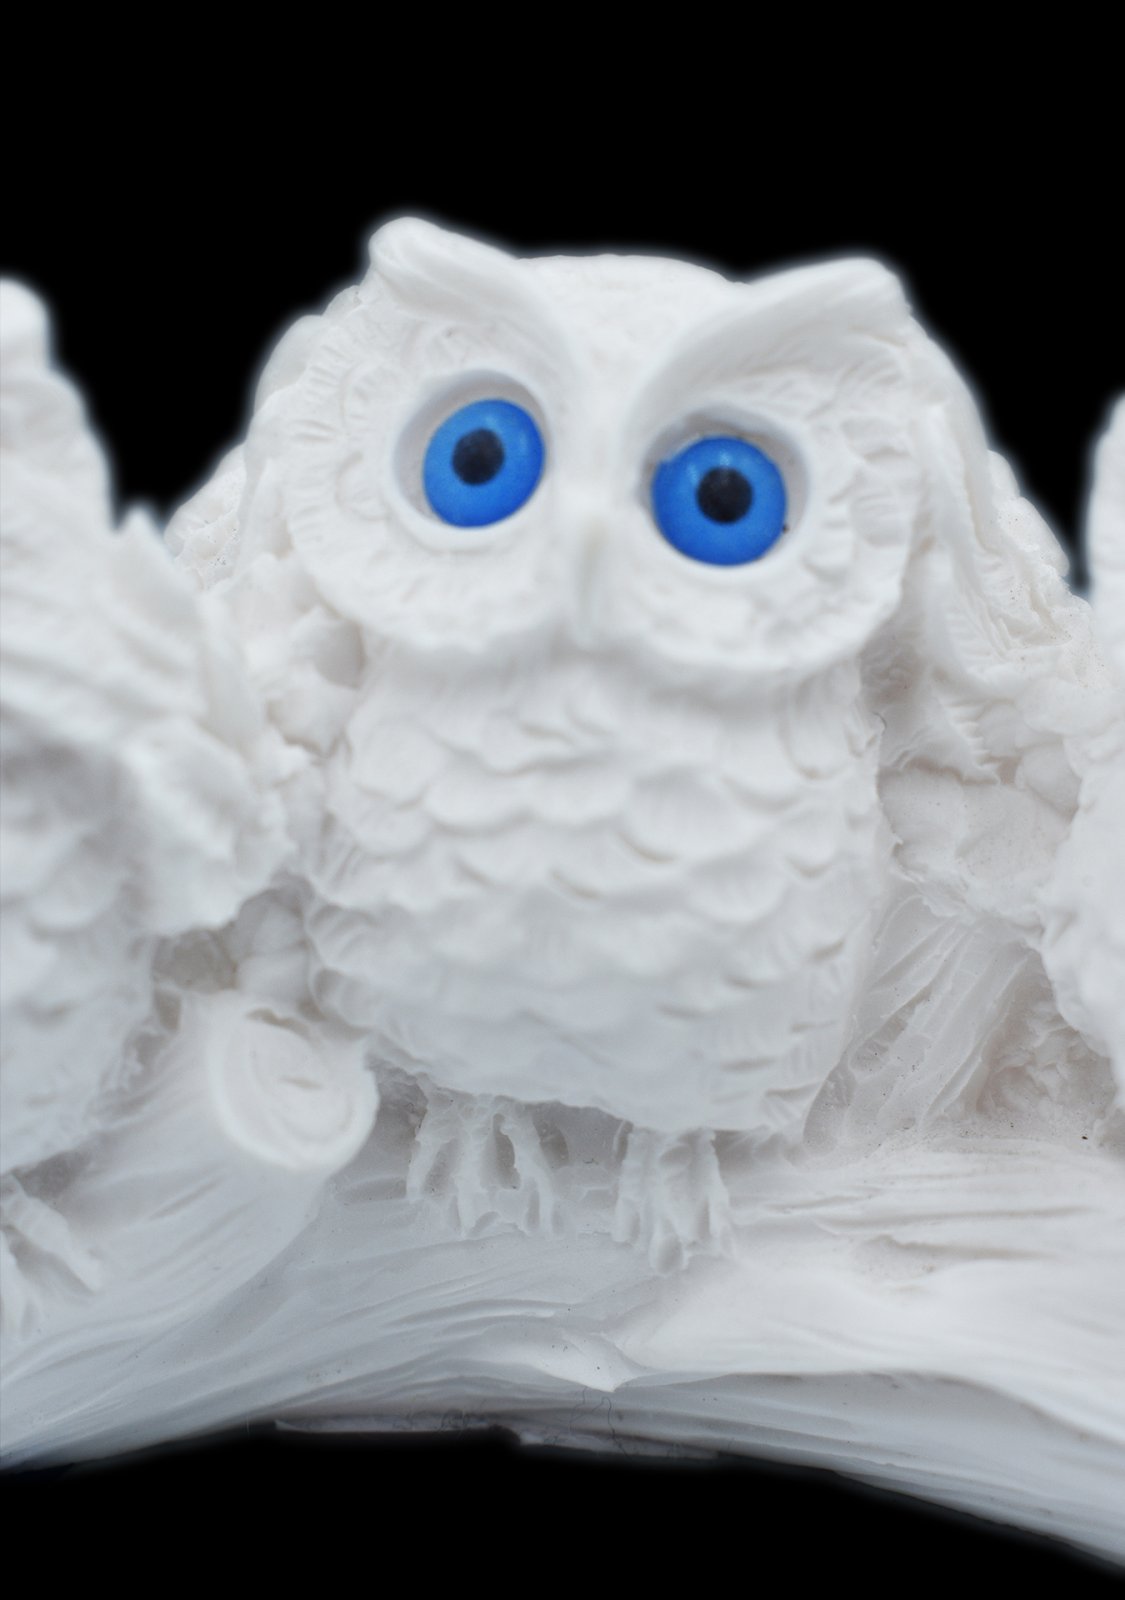 The three wise owls alabaster statue, the symbol of goddess Athena and wisdom